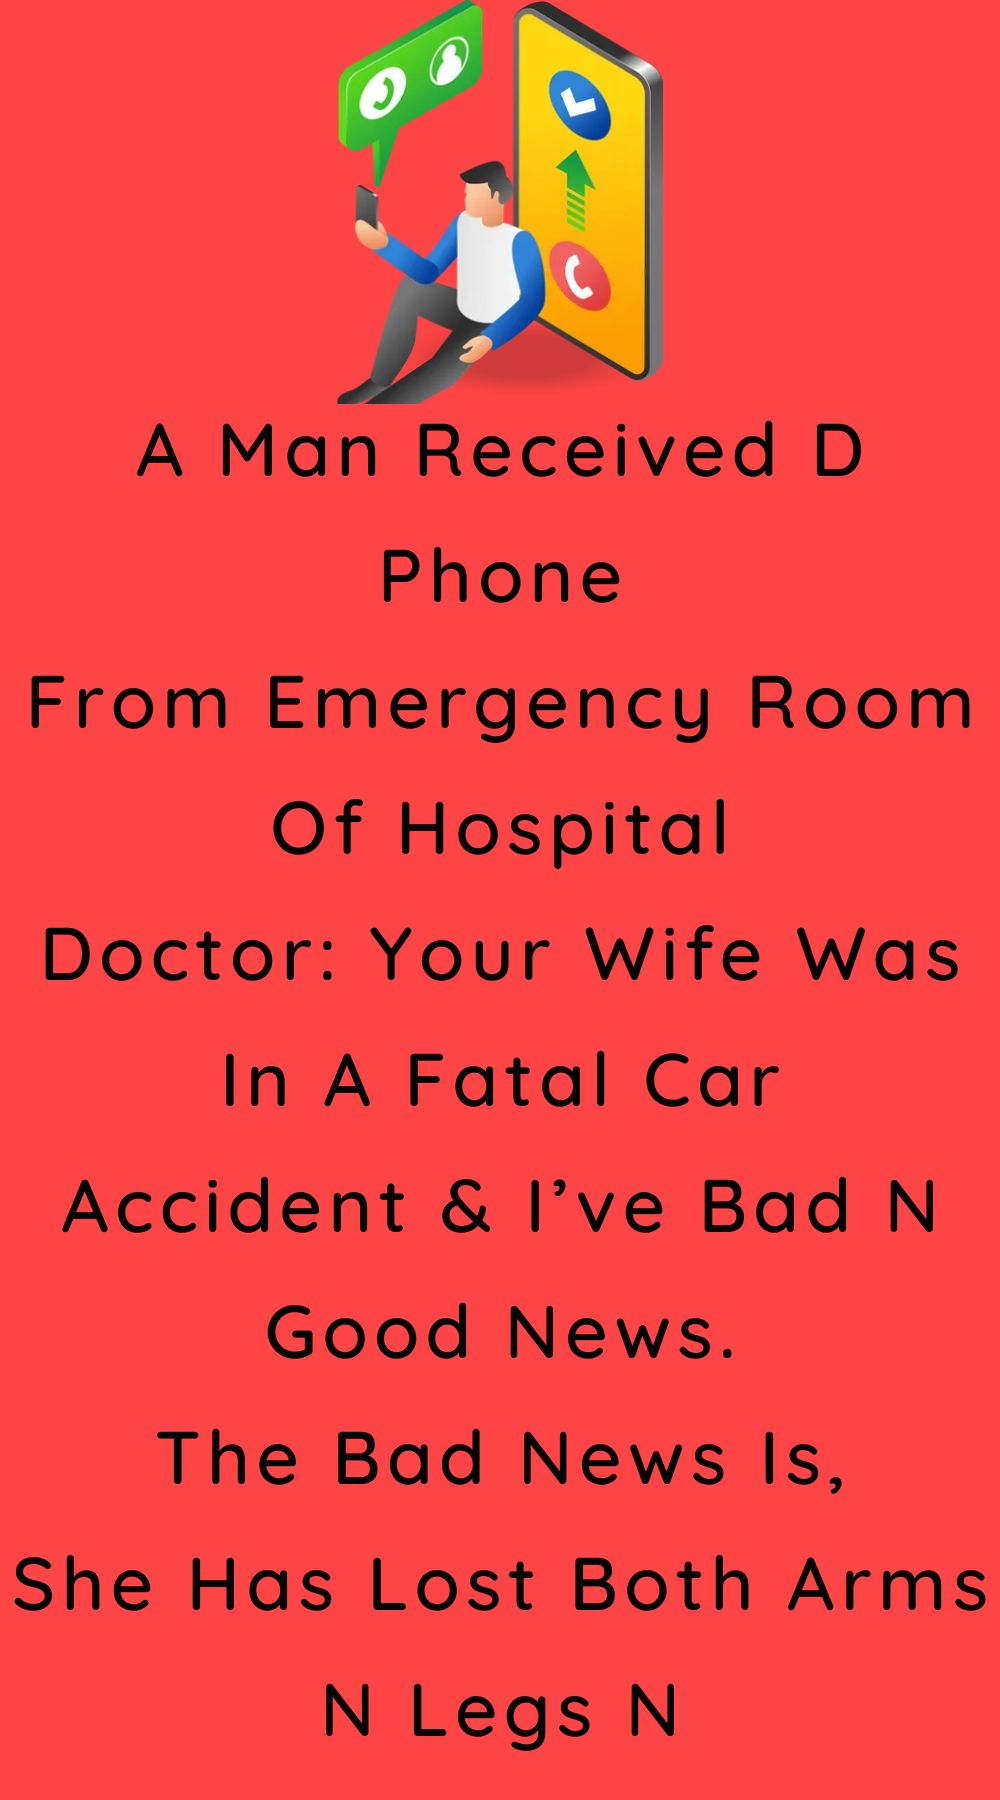 A Man Received D Phone
From Emergency Room